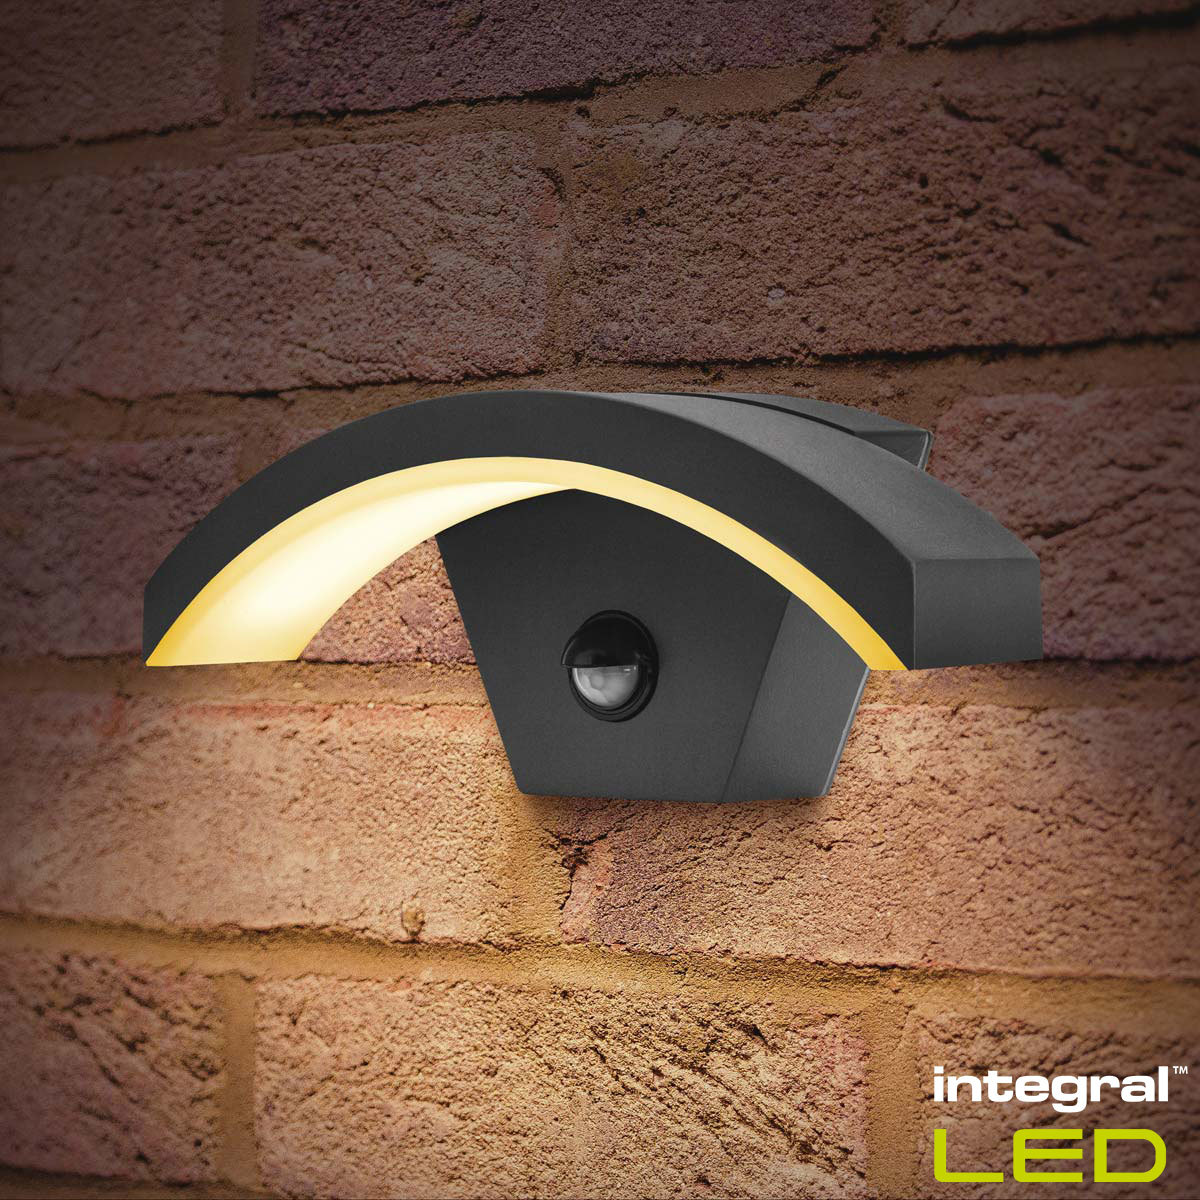 Integral Curve Outdoor Light with Sensor | Costc...